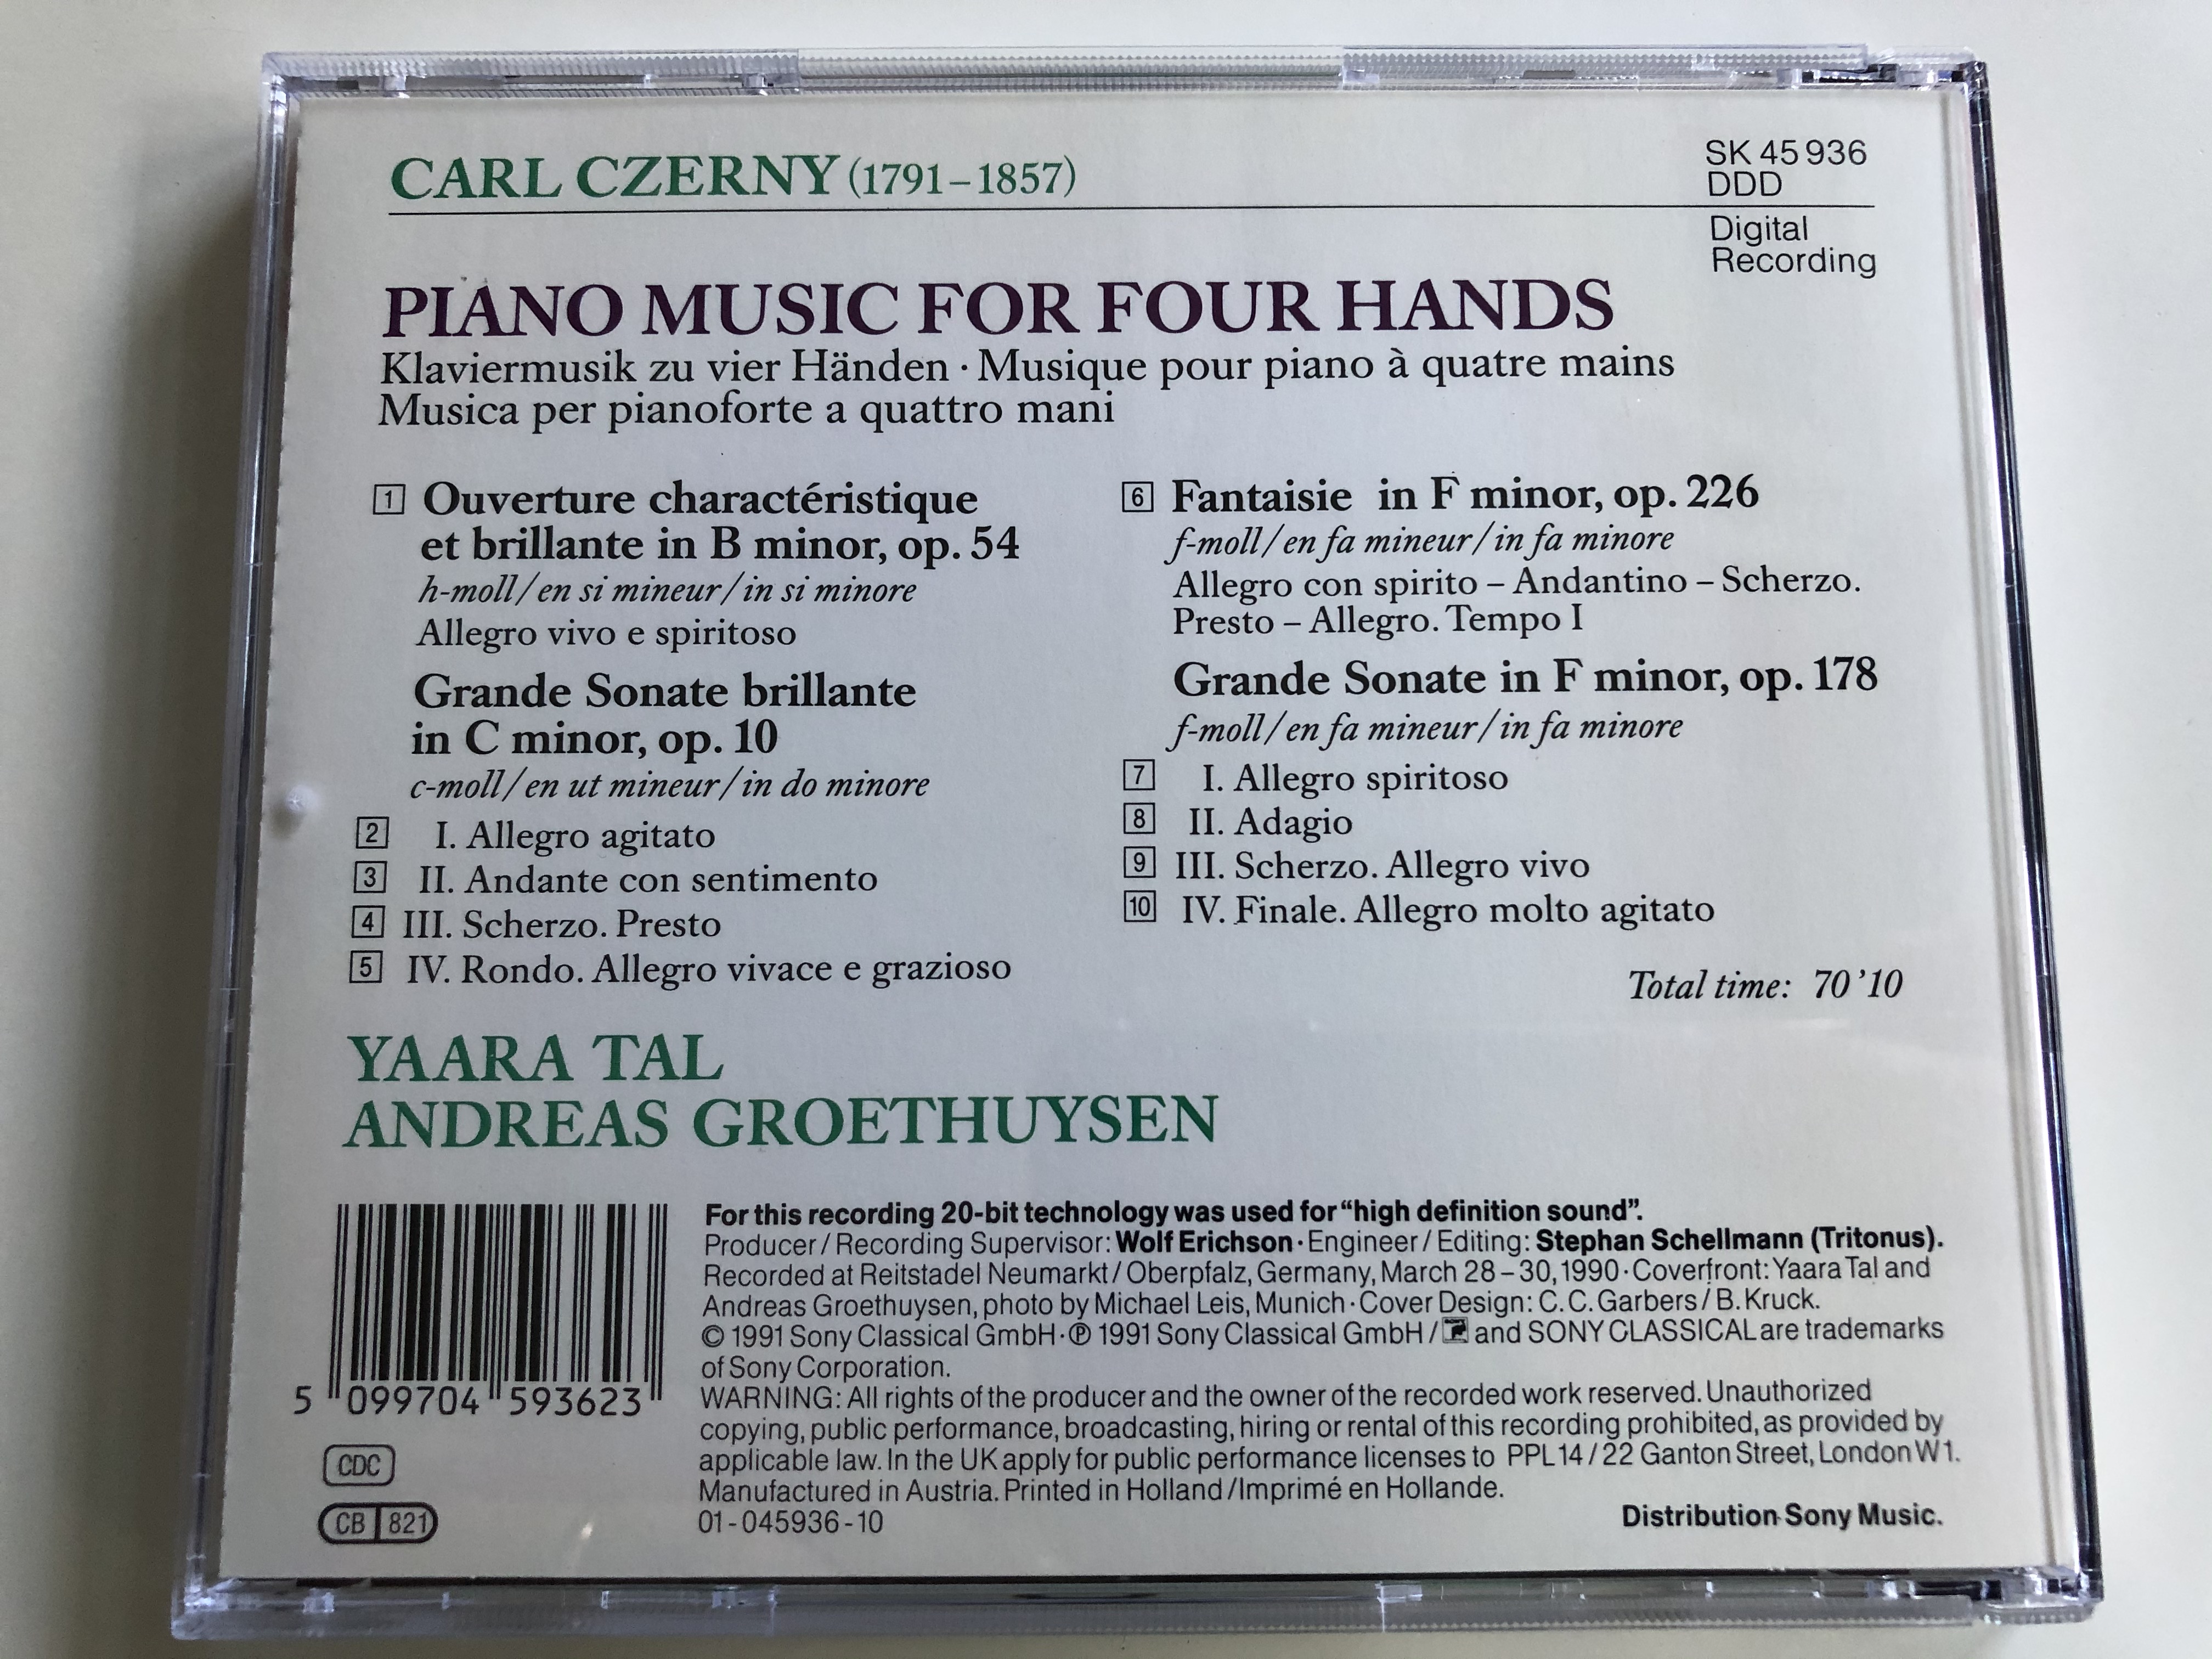 carl-czerny-piano-music-for-four-hands-duo-tal-groethuysen-sony-classical-audio-cd-1991-sk-45936-10-.jpg